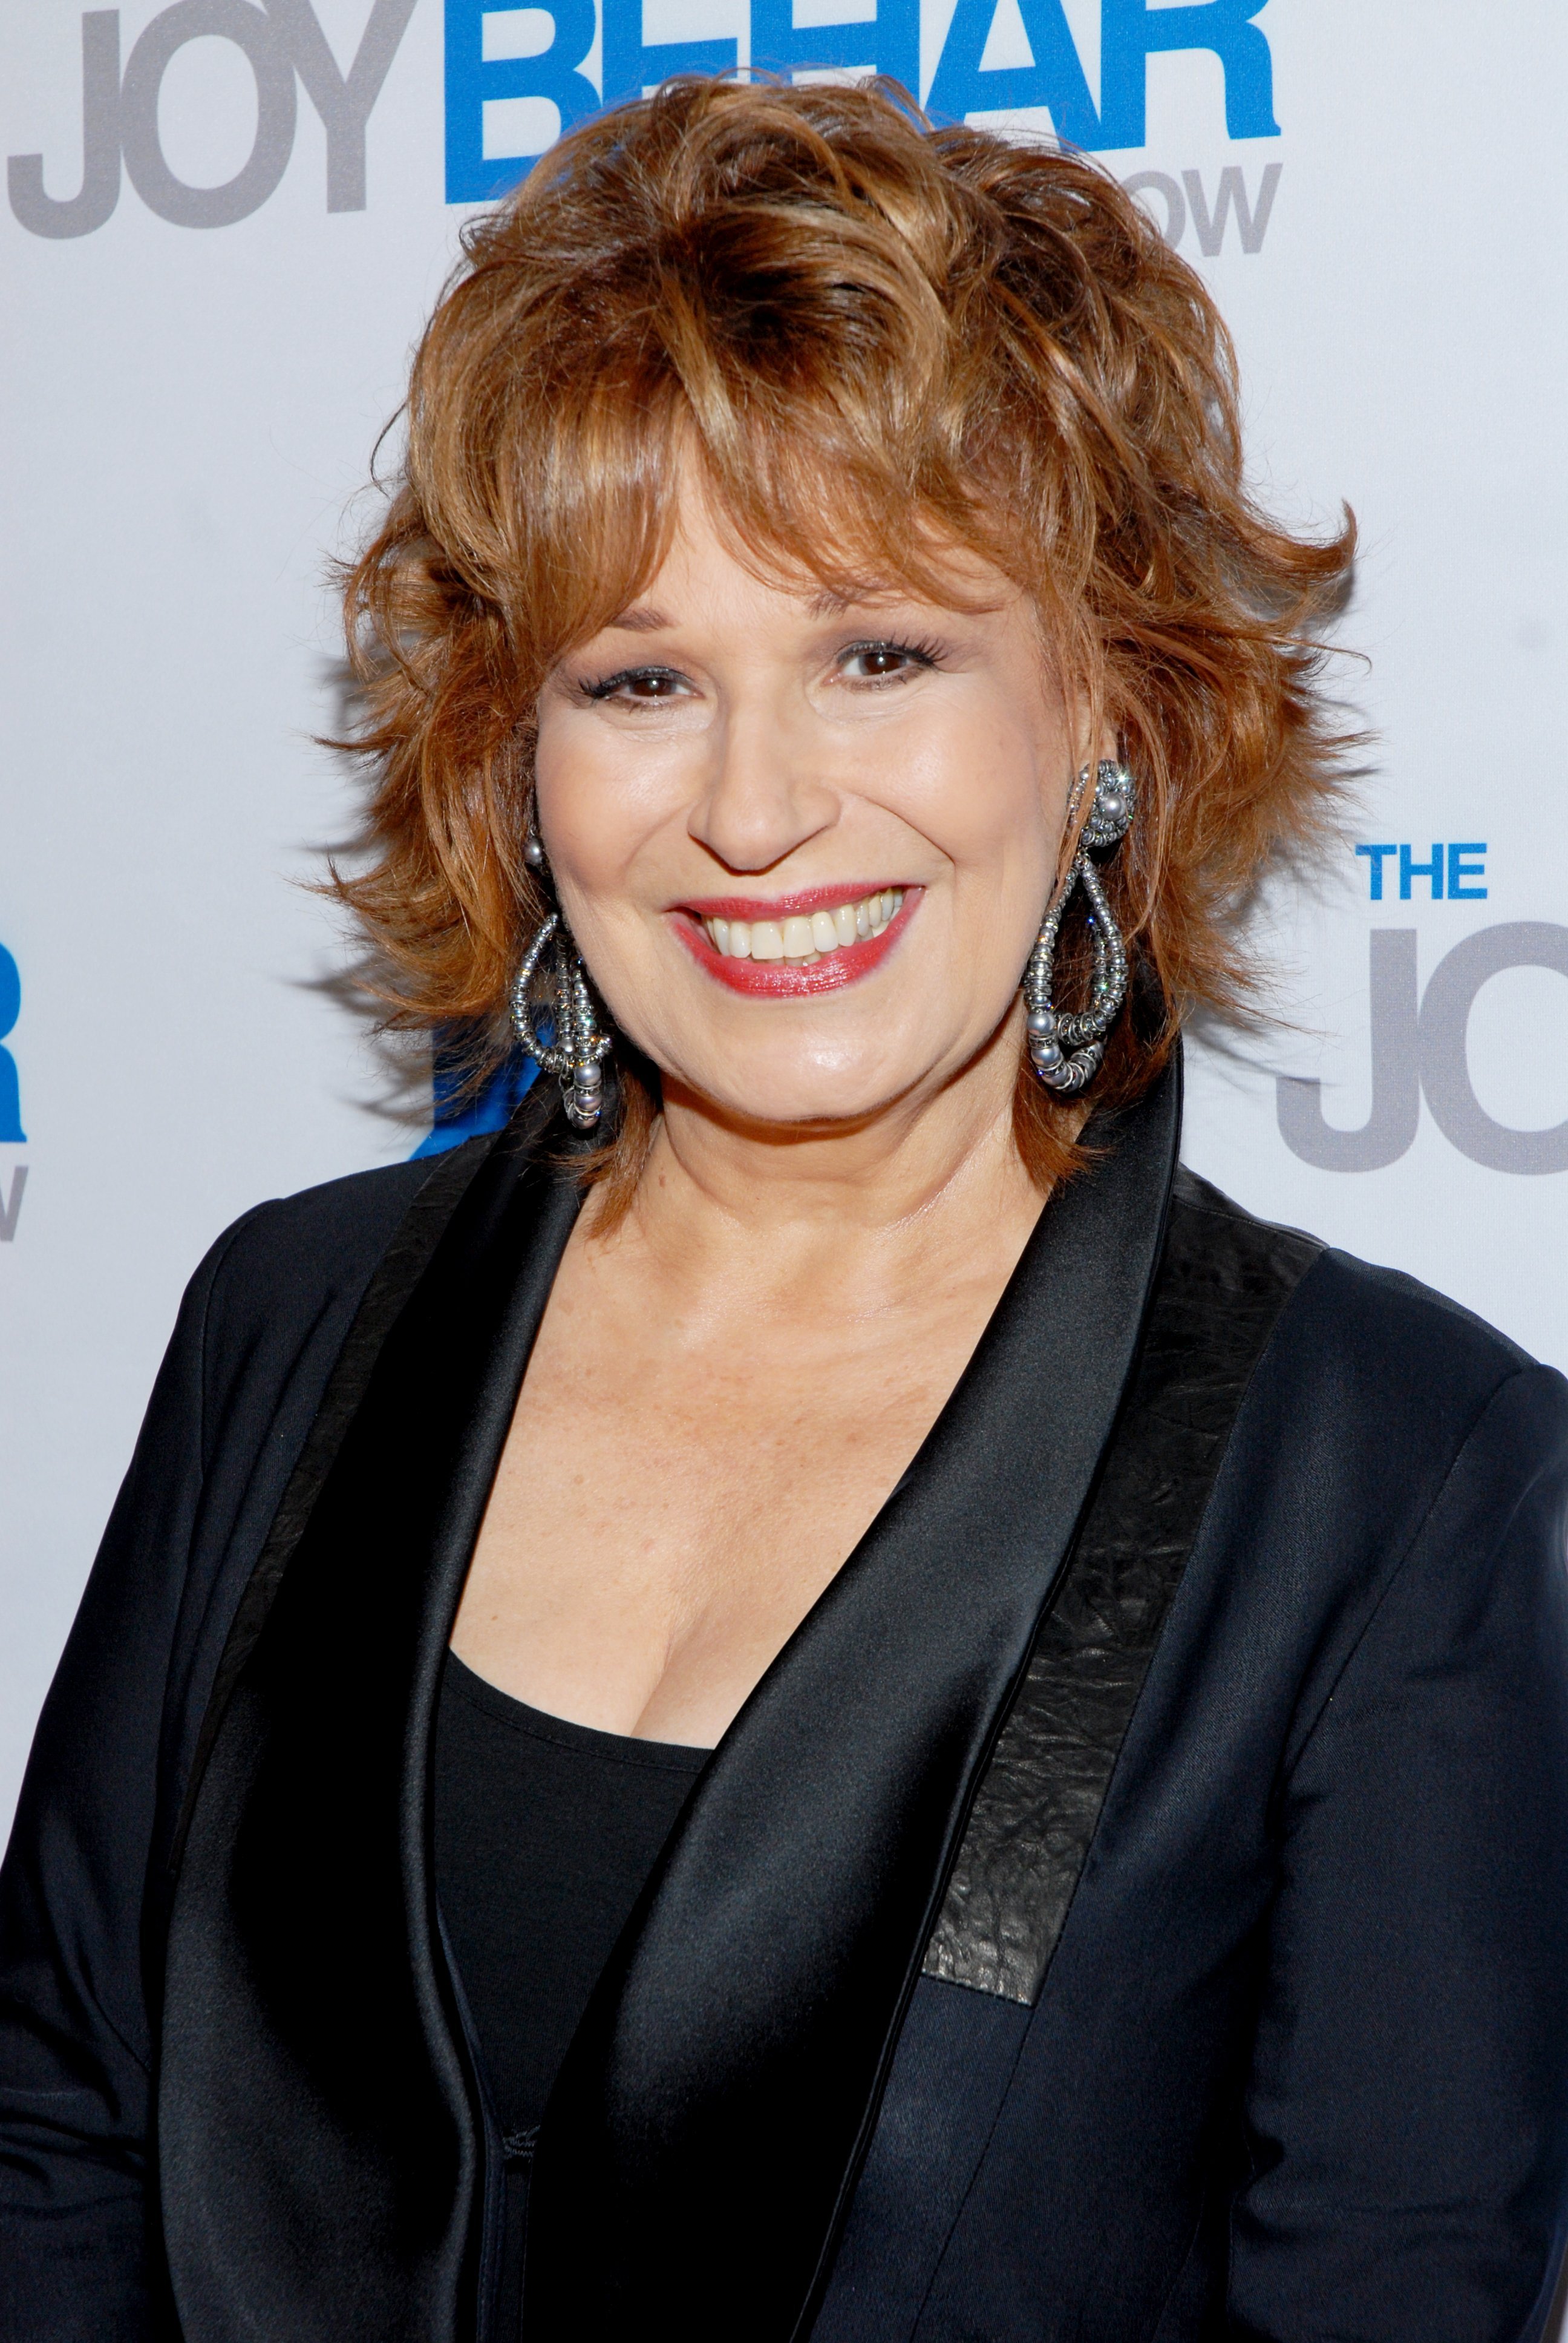 Joy Behar attends "The Joy Behar Show" launch party at the Oak Room on September 23, 2009. | Photo: GettyImages